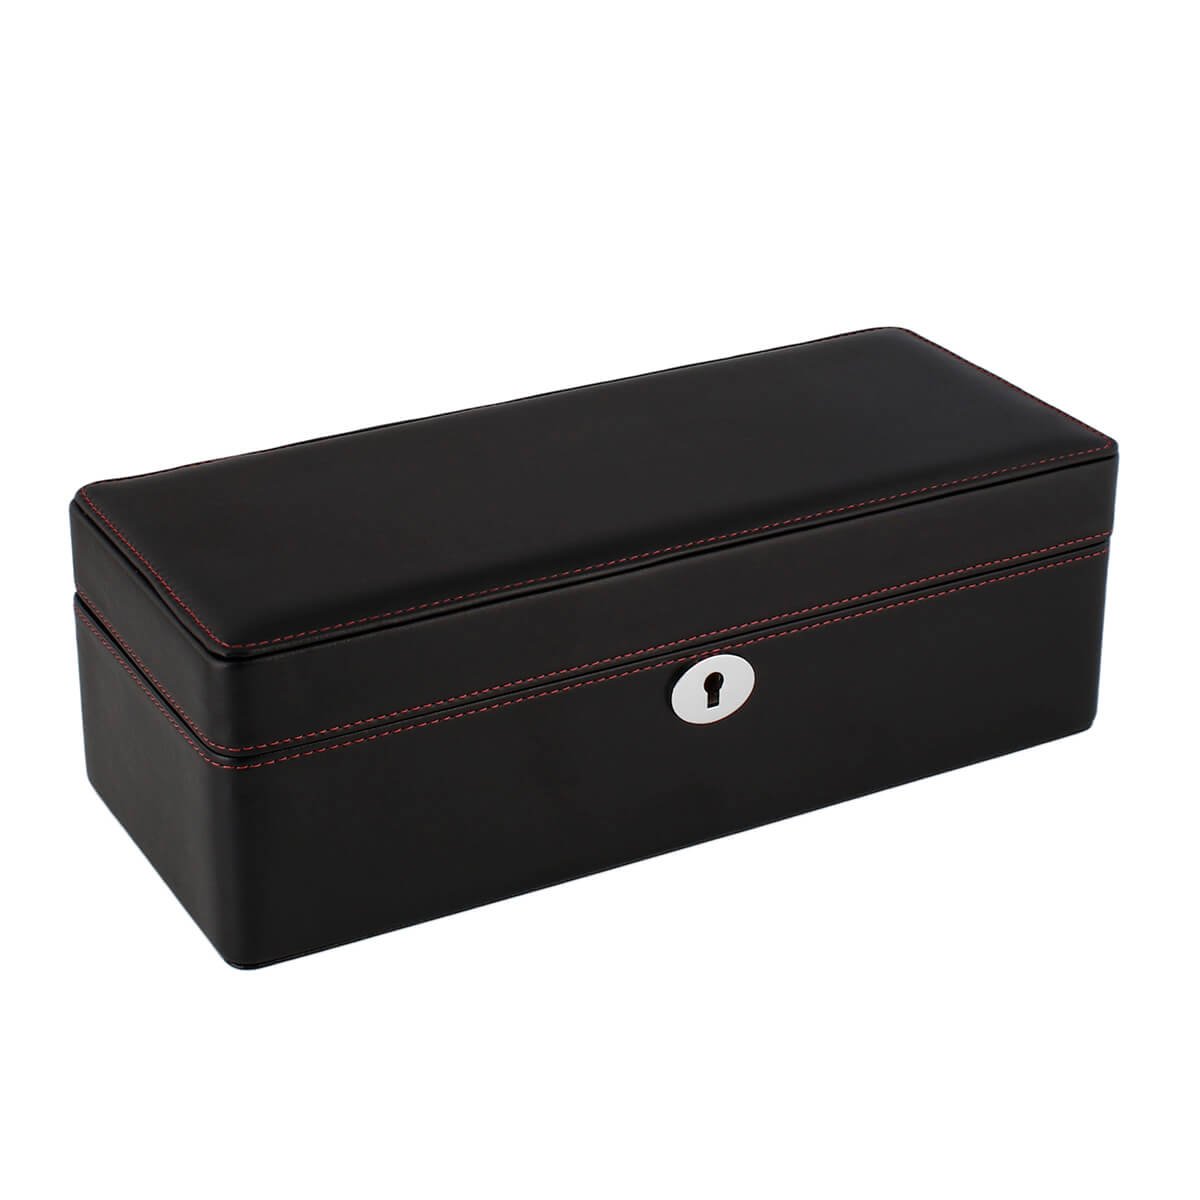 4 Watch Box in Black Leather Finish Fine Quality by Aevitas